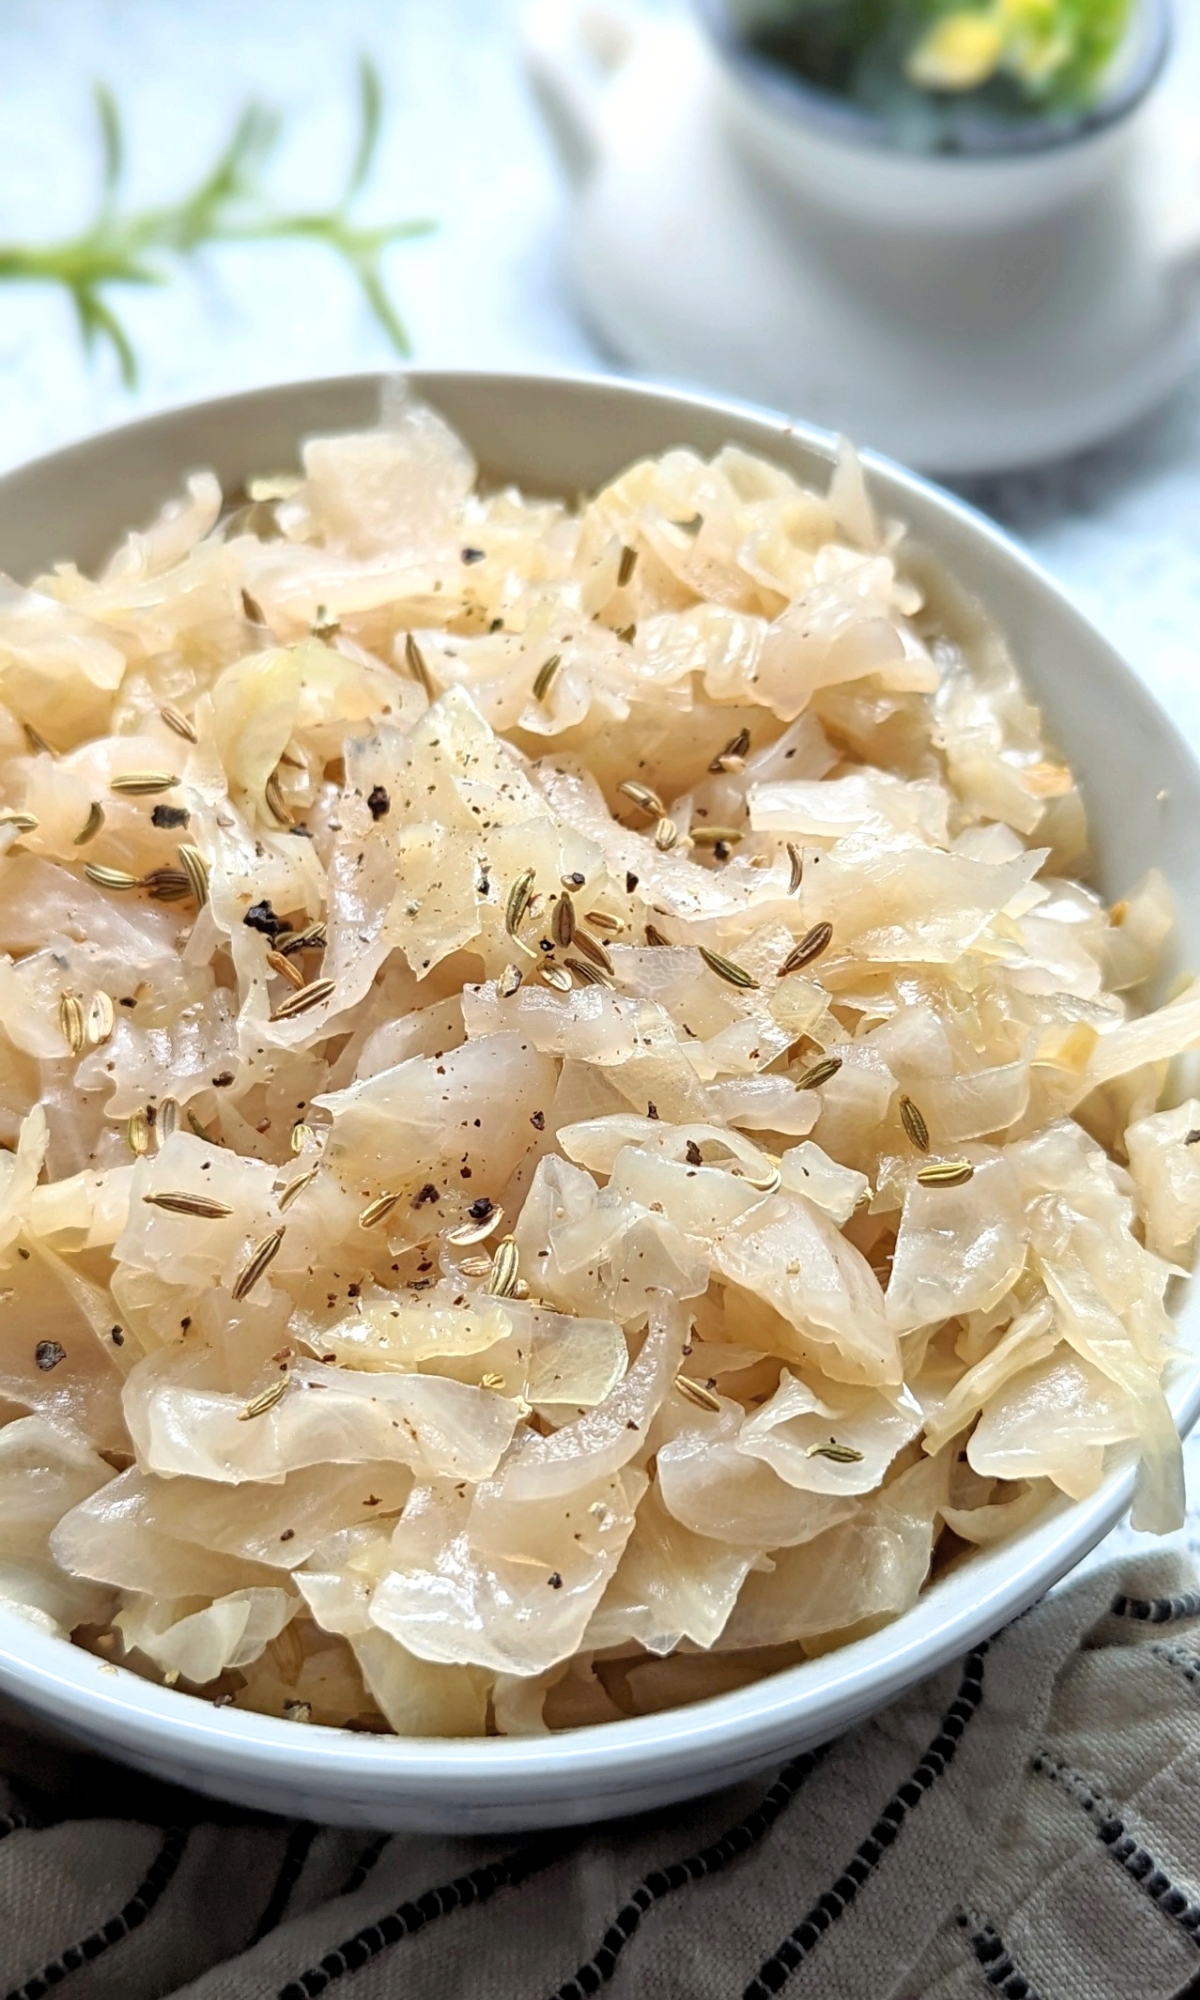 low salt sauerkraut without salt easy low sodium cabbage recipe with vinegar onion and caraway seeds